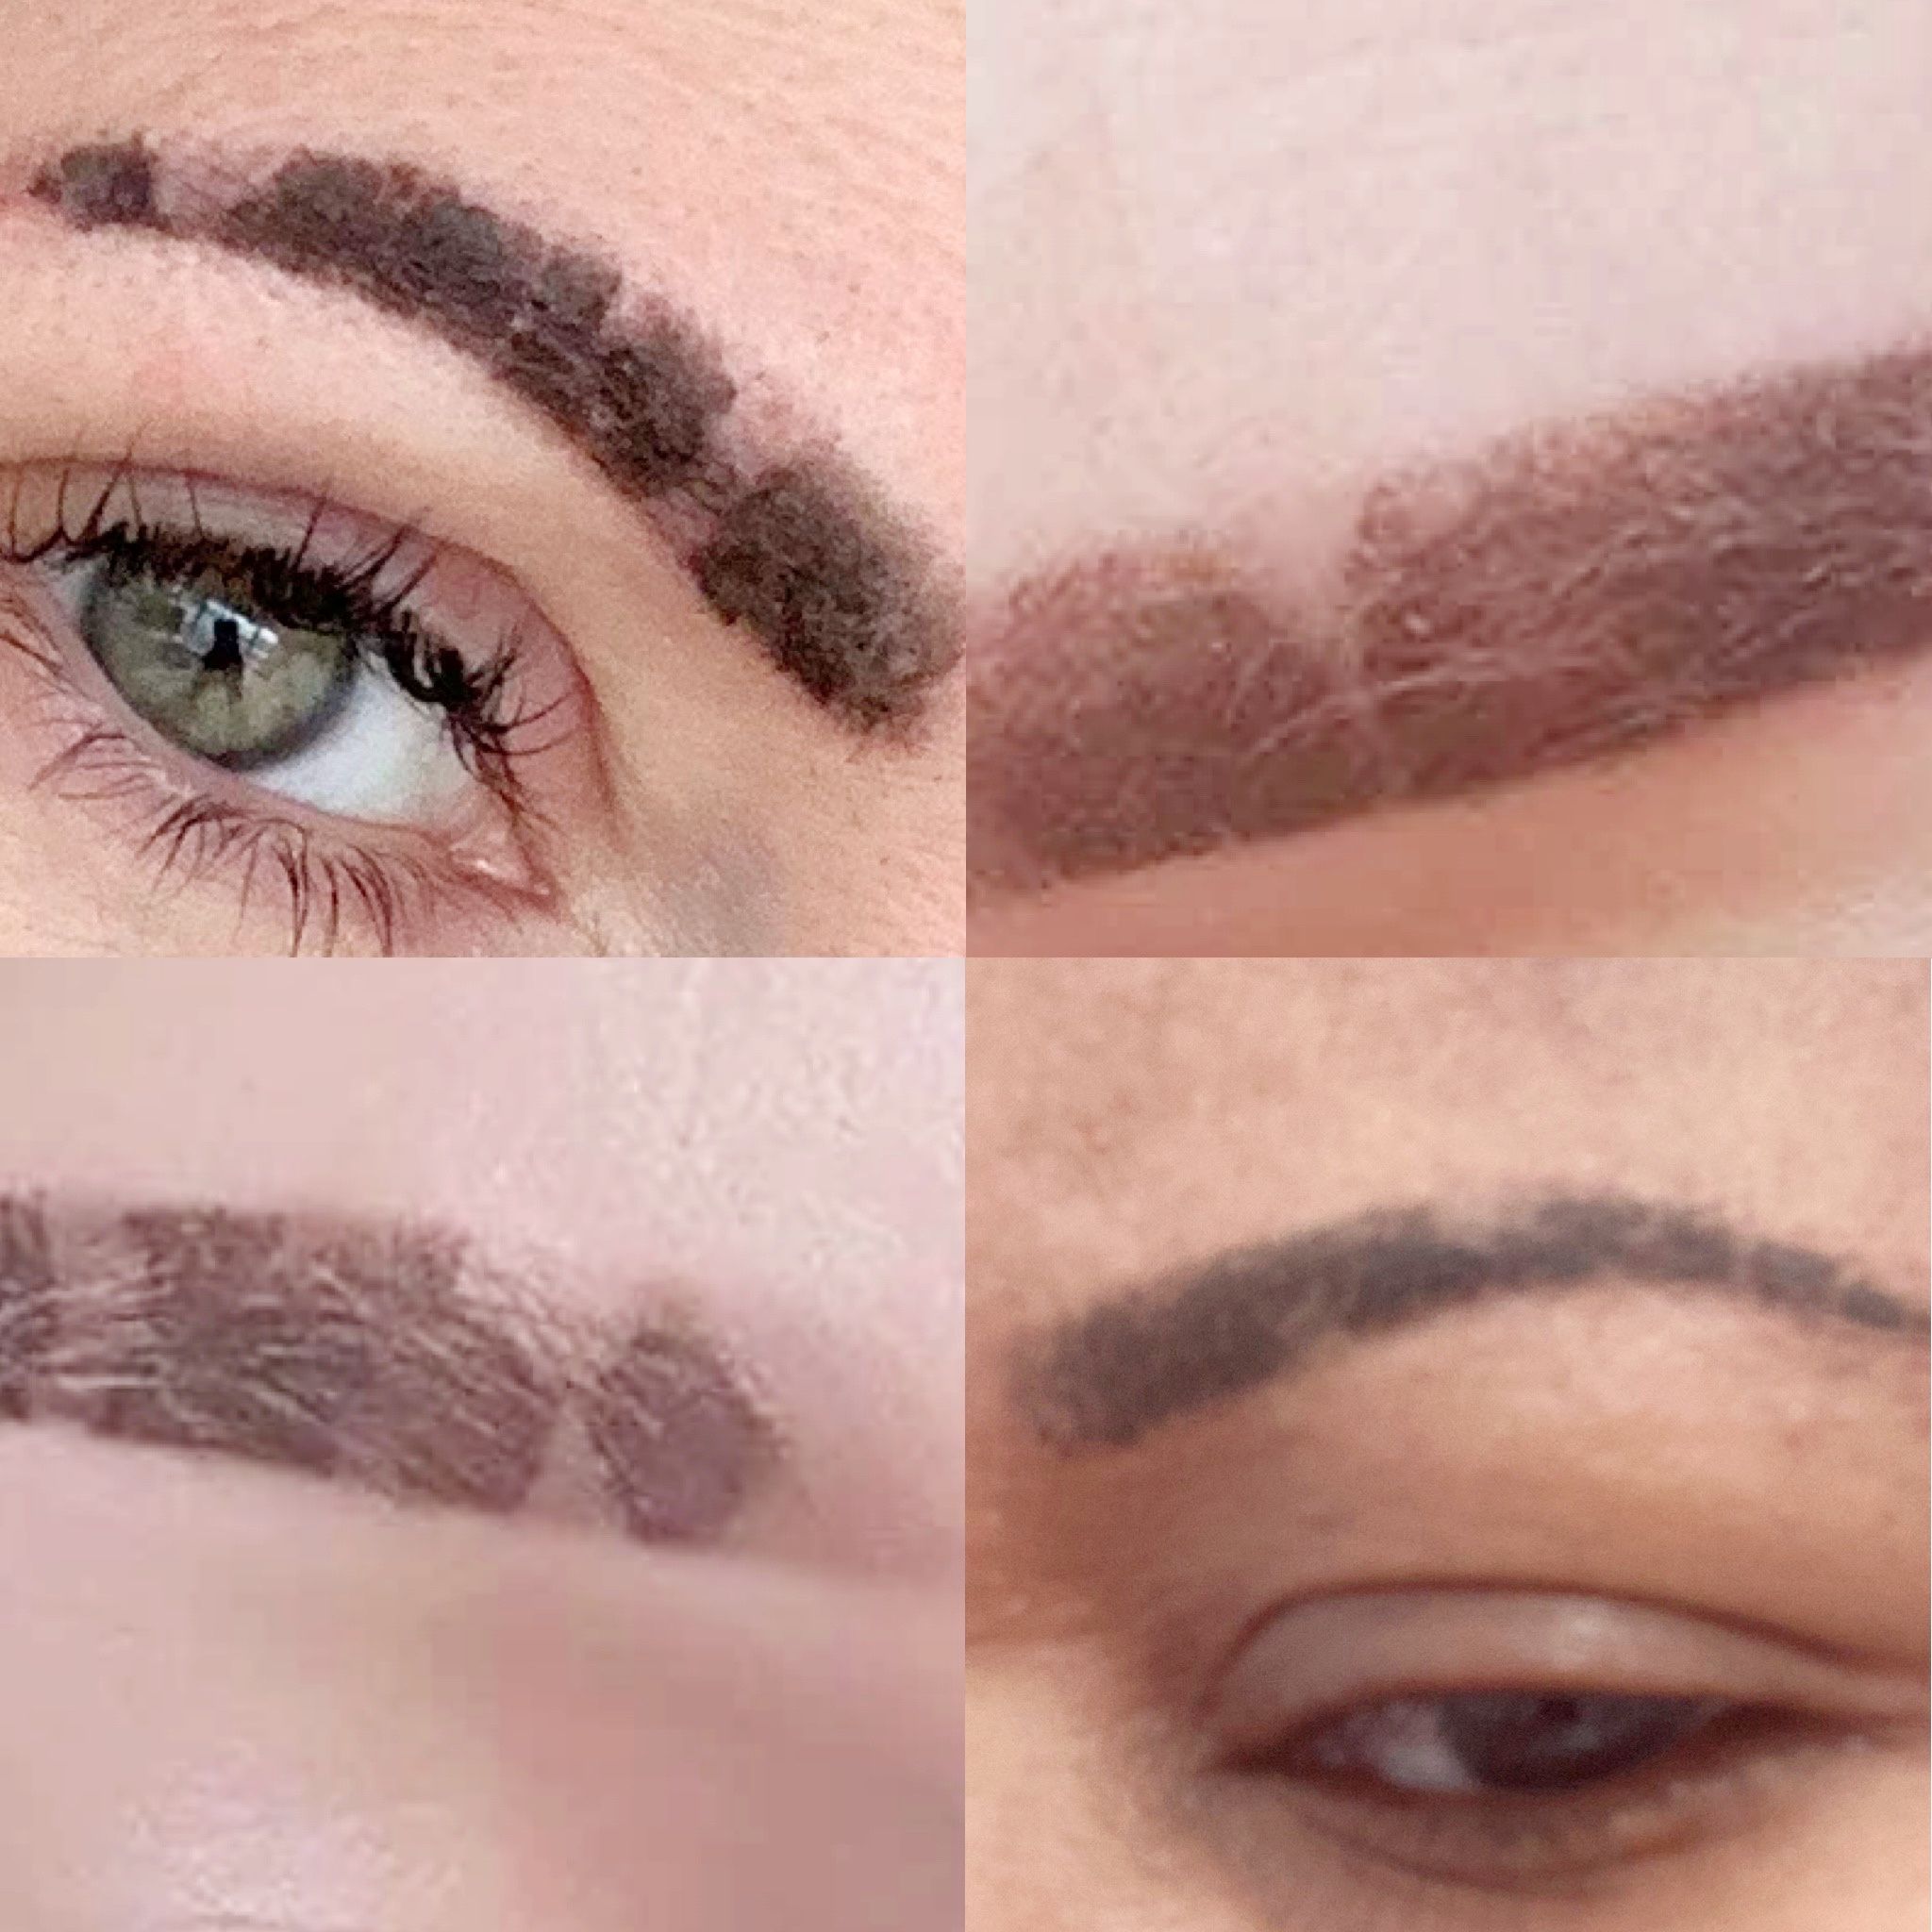 How long does it take for an eyebrow tattoo to heal completely? What are  some aftercare instructions for eyebrow tattoos? - Quora